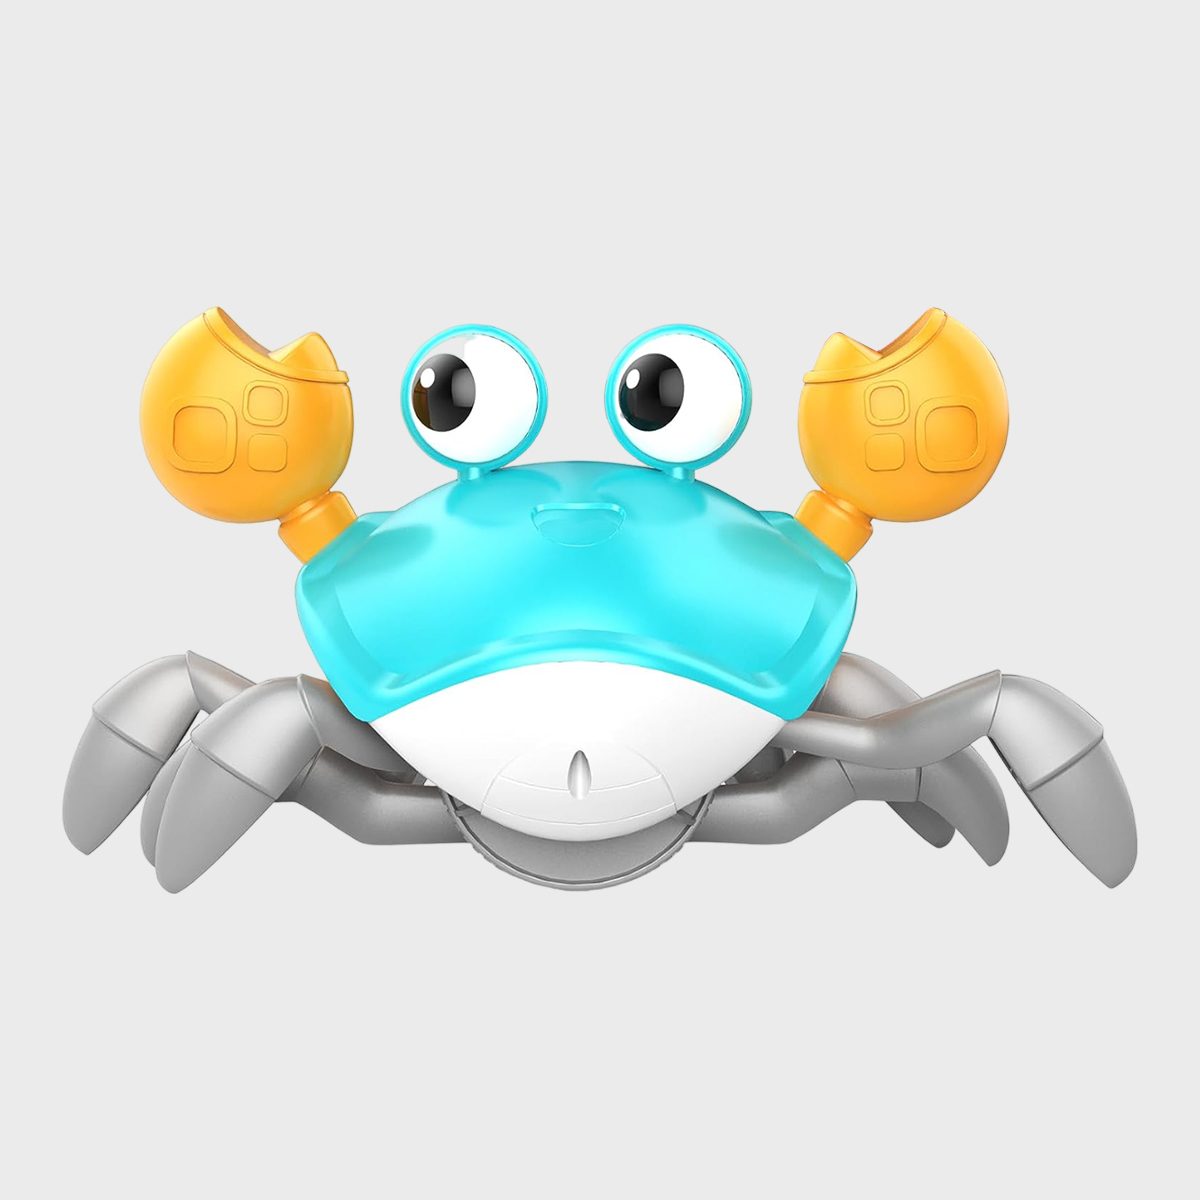 <p>Not all babies enjoy tummy time, but it's important for strengthening their neck, shoulder and arm muscles. This viral <a href="https://www.amazon.com/Crawling-Crab-Baby-Toy-Sensory/dp/B09VGG4H2Y" rel="noopener noreferrer">Tiktok toy</a> will entertain even the most <a href="https://www.rd.com/list/signs-baby-trusts-you/">resistant babies</a> during tummy time. Not only that, but it will eventually encourage crawling as little ones try to capture the crab as it scurries forward, backward and side to side.</p> <p class="listicle-page__cta-button-shop"><a class="shop-btn" href="https://www.amazon.com/Crawling-Crab-Baby-Toy-Sensory/dp/B09VGG4H2Y">Shop Now</a></p>